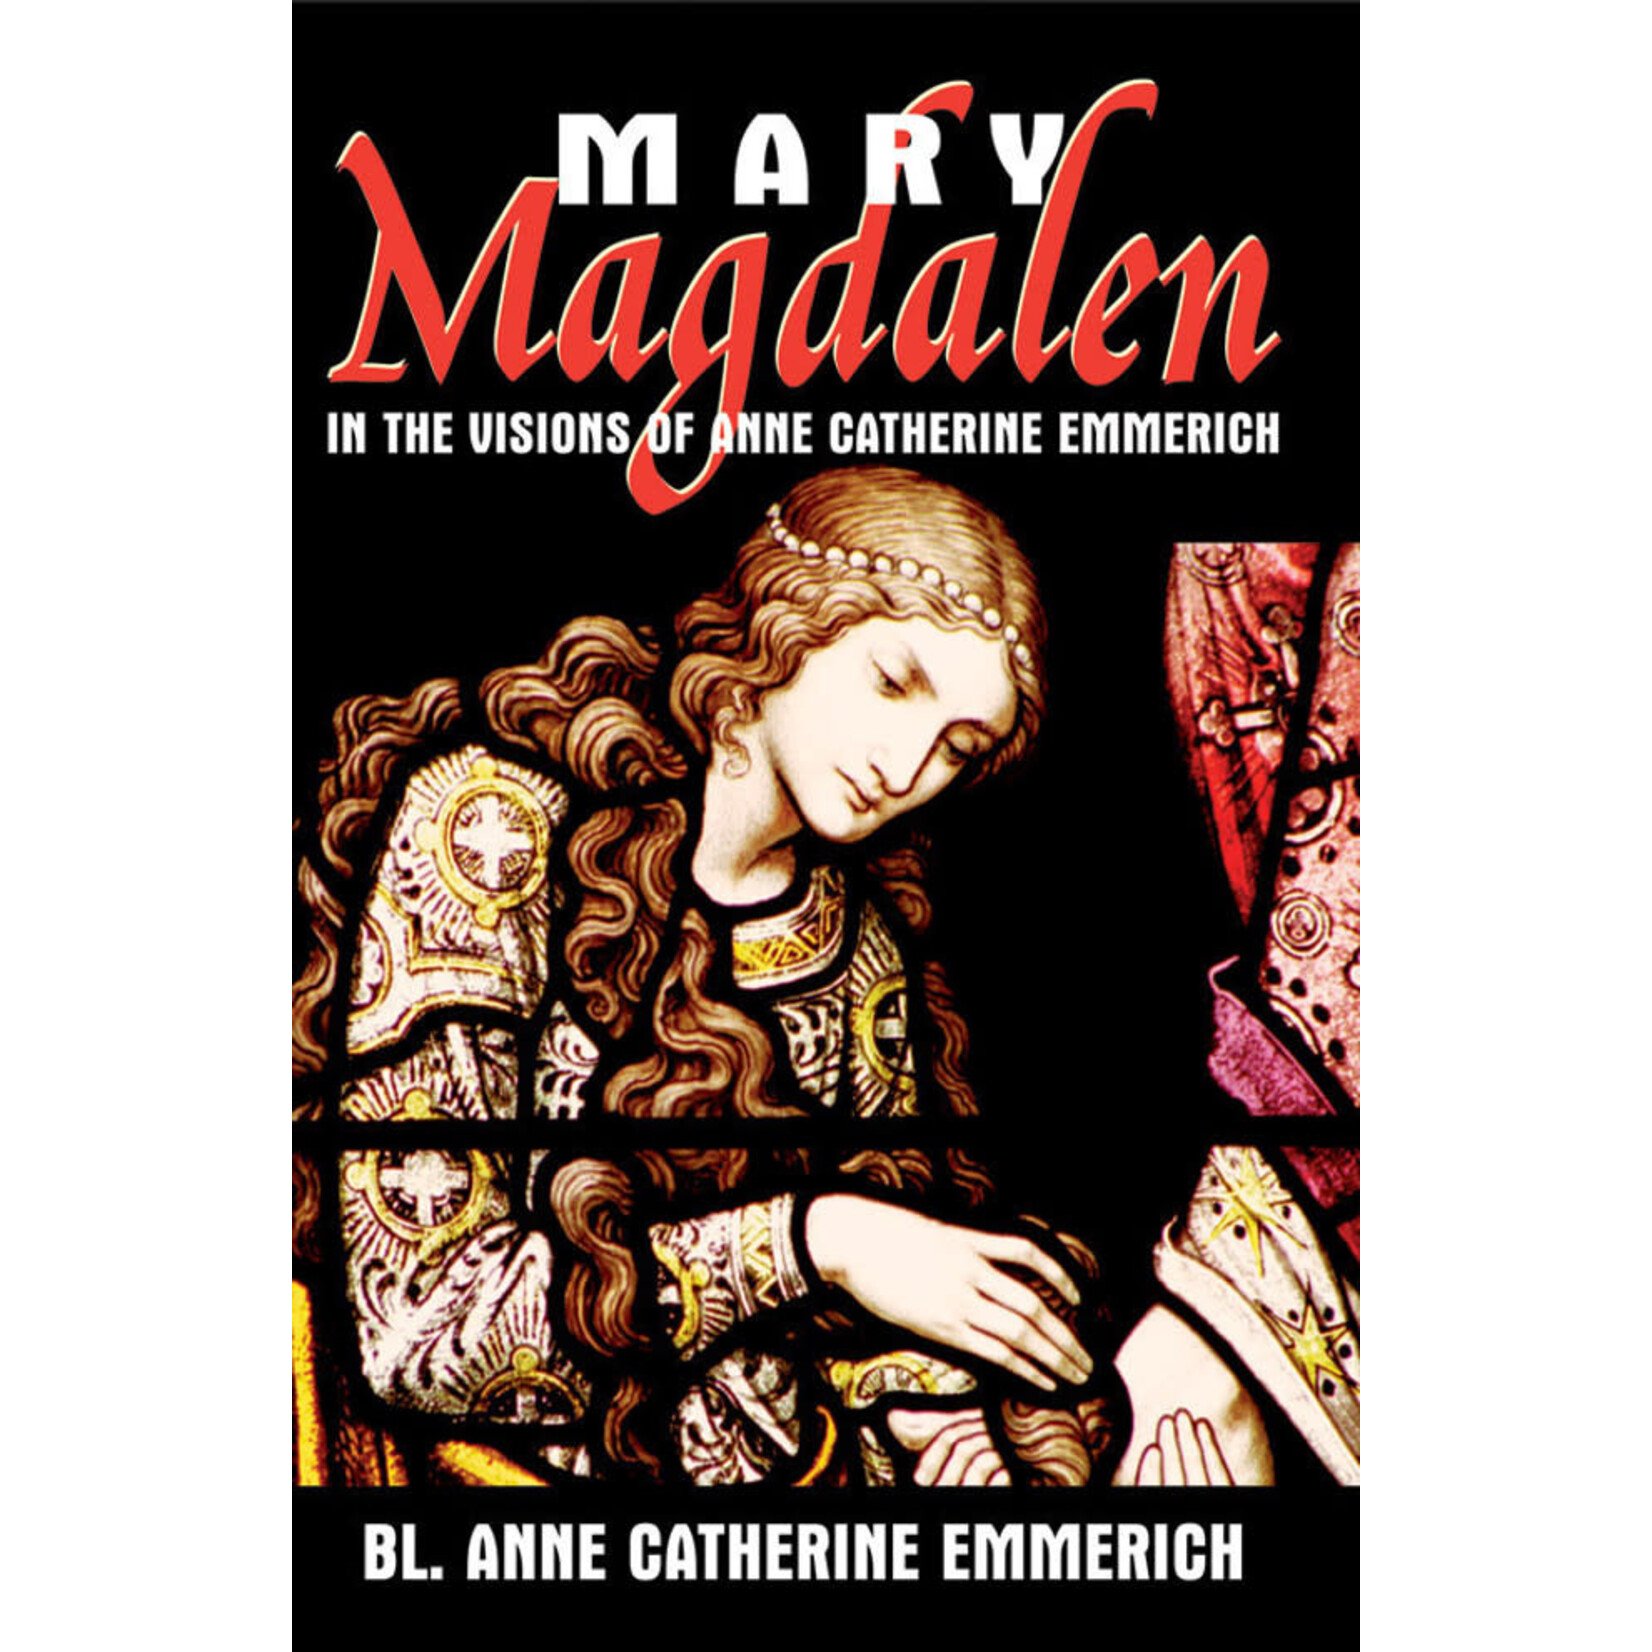 Mary Magdalen In The Visions of Anne Catherine Emmerich